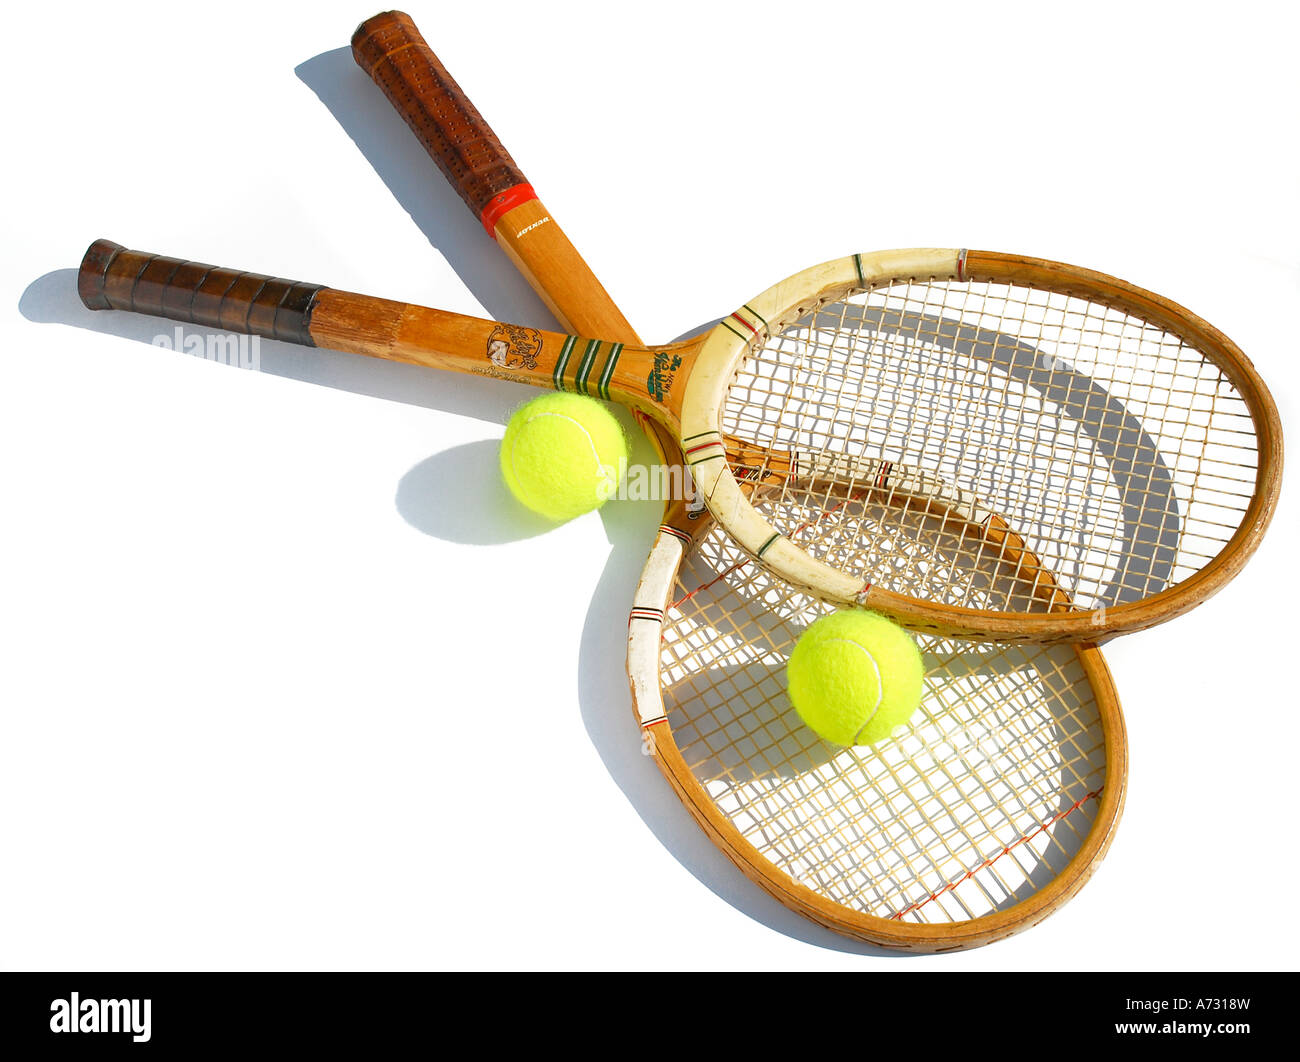 Wooden Tennis Racquets with tennis balls. Picture by Patrick Steel patricksteel Stock Photo